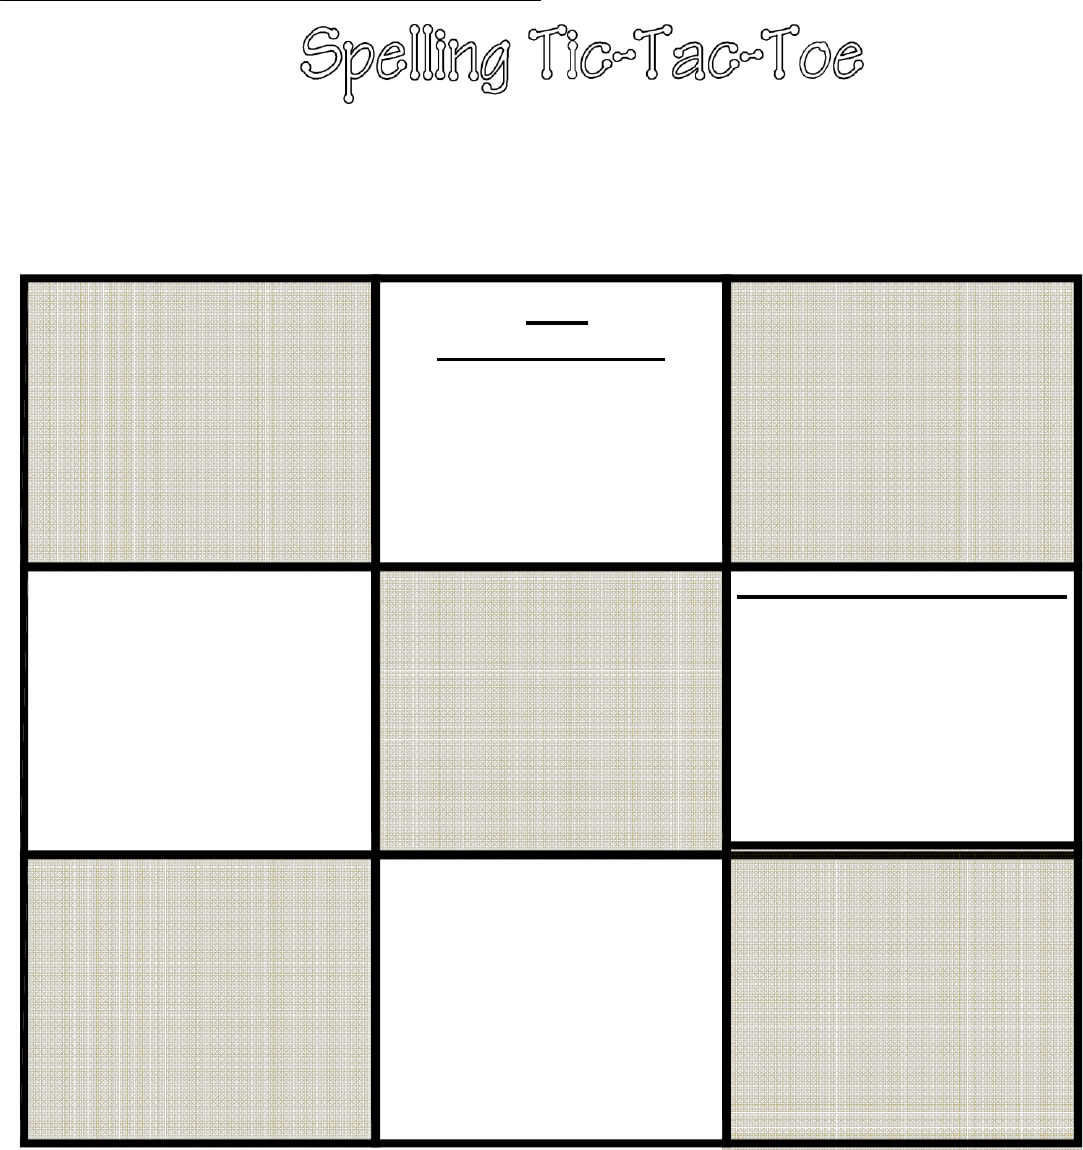 Tic Tac Toe Template In Word And Pdf Formats For Tic Tac Toe Template Word